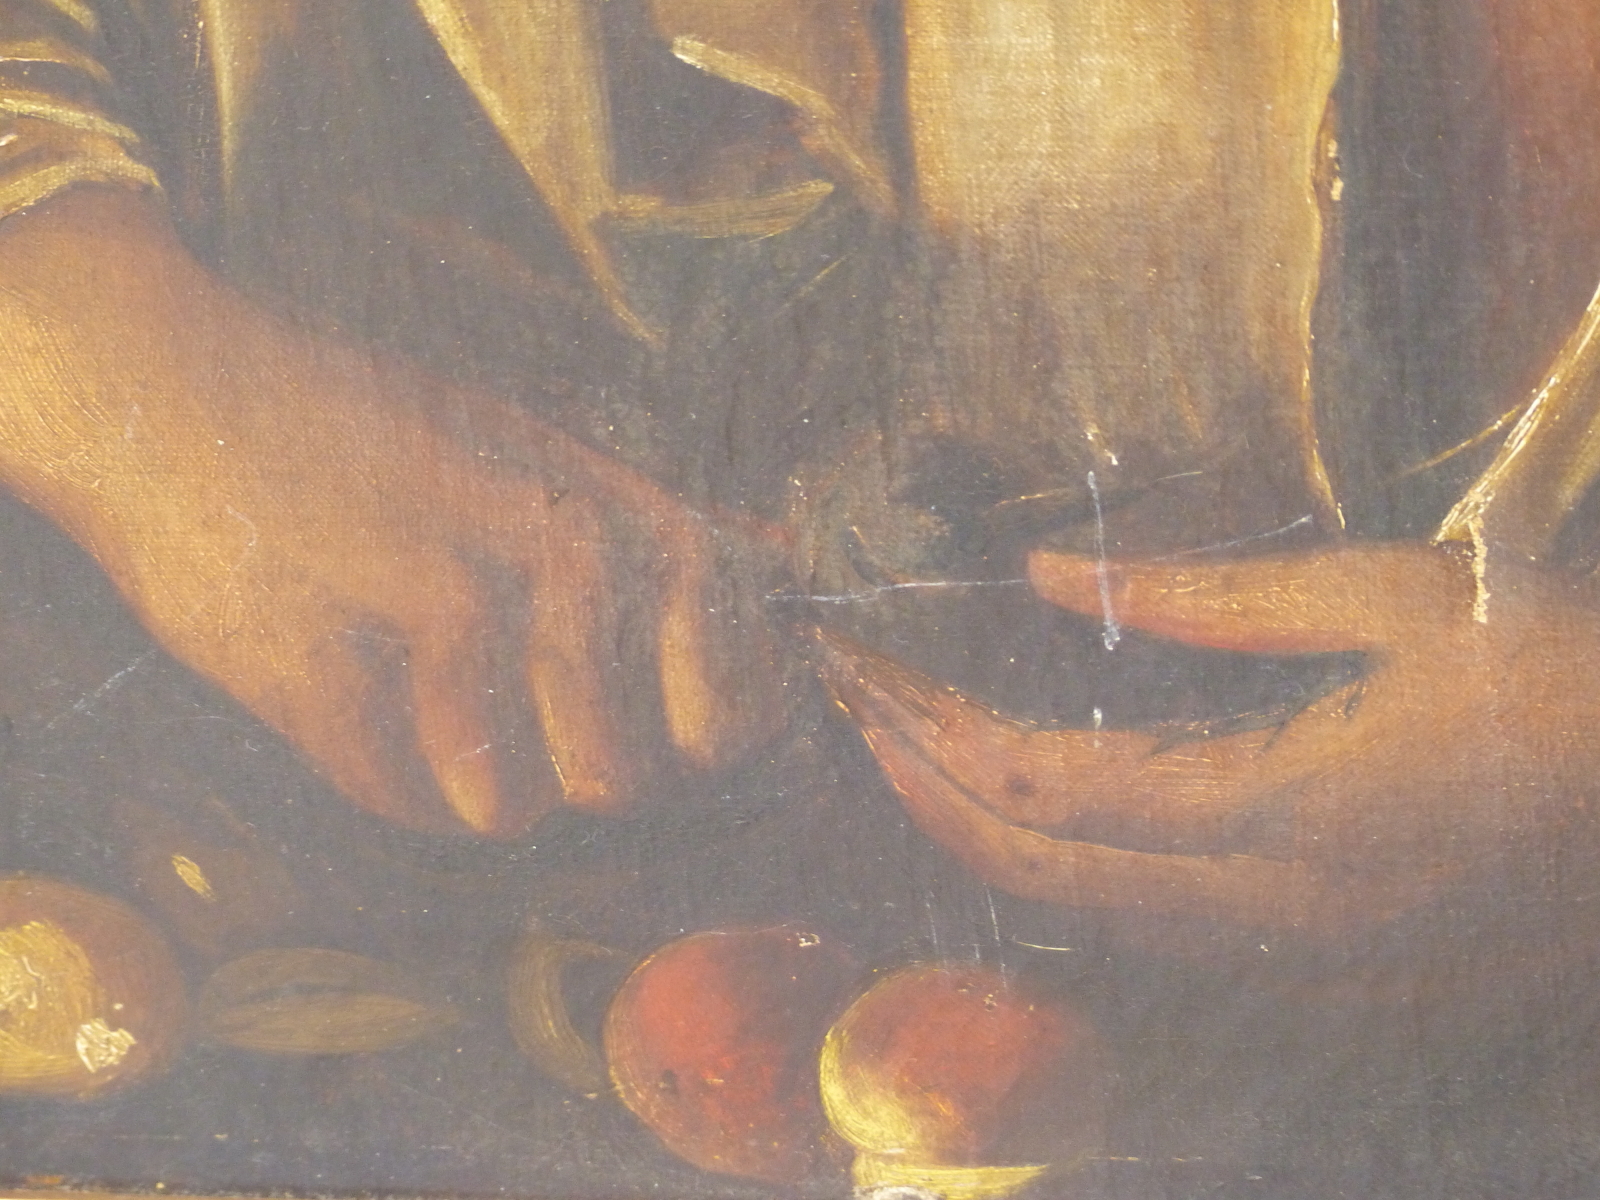 AFTER THE OLD MASTERS. (EARLY 19th CENTURY) A YOUNG MAN PEELING APPLES. OIL ON CANVAS 50 X 60 cm. - Image 4 of 8